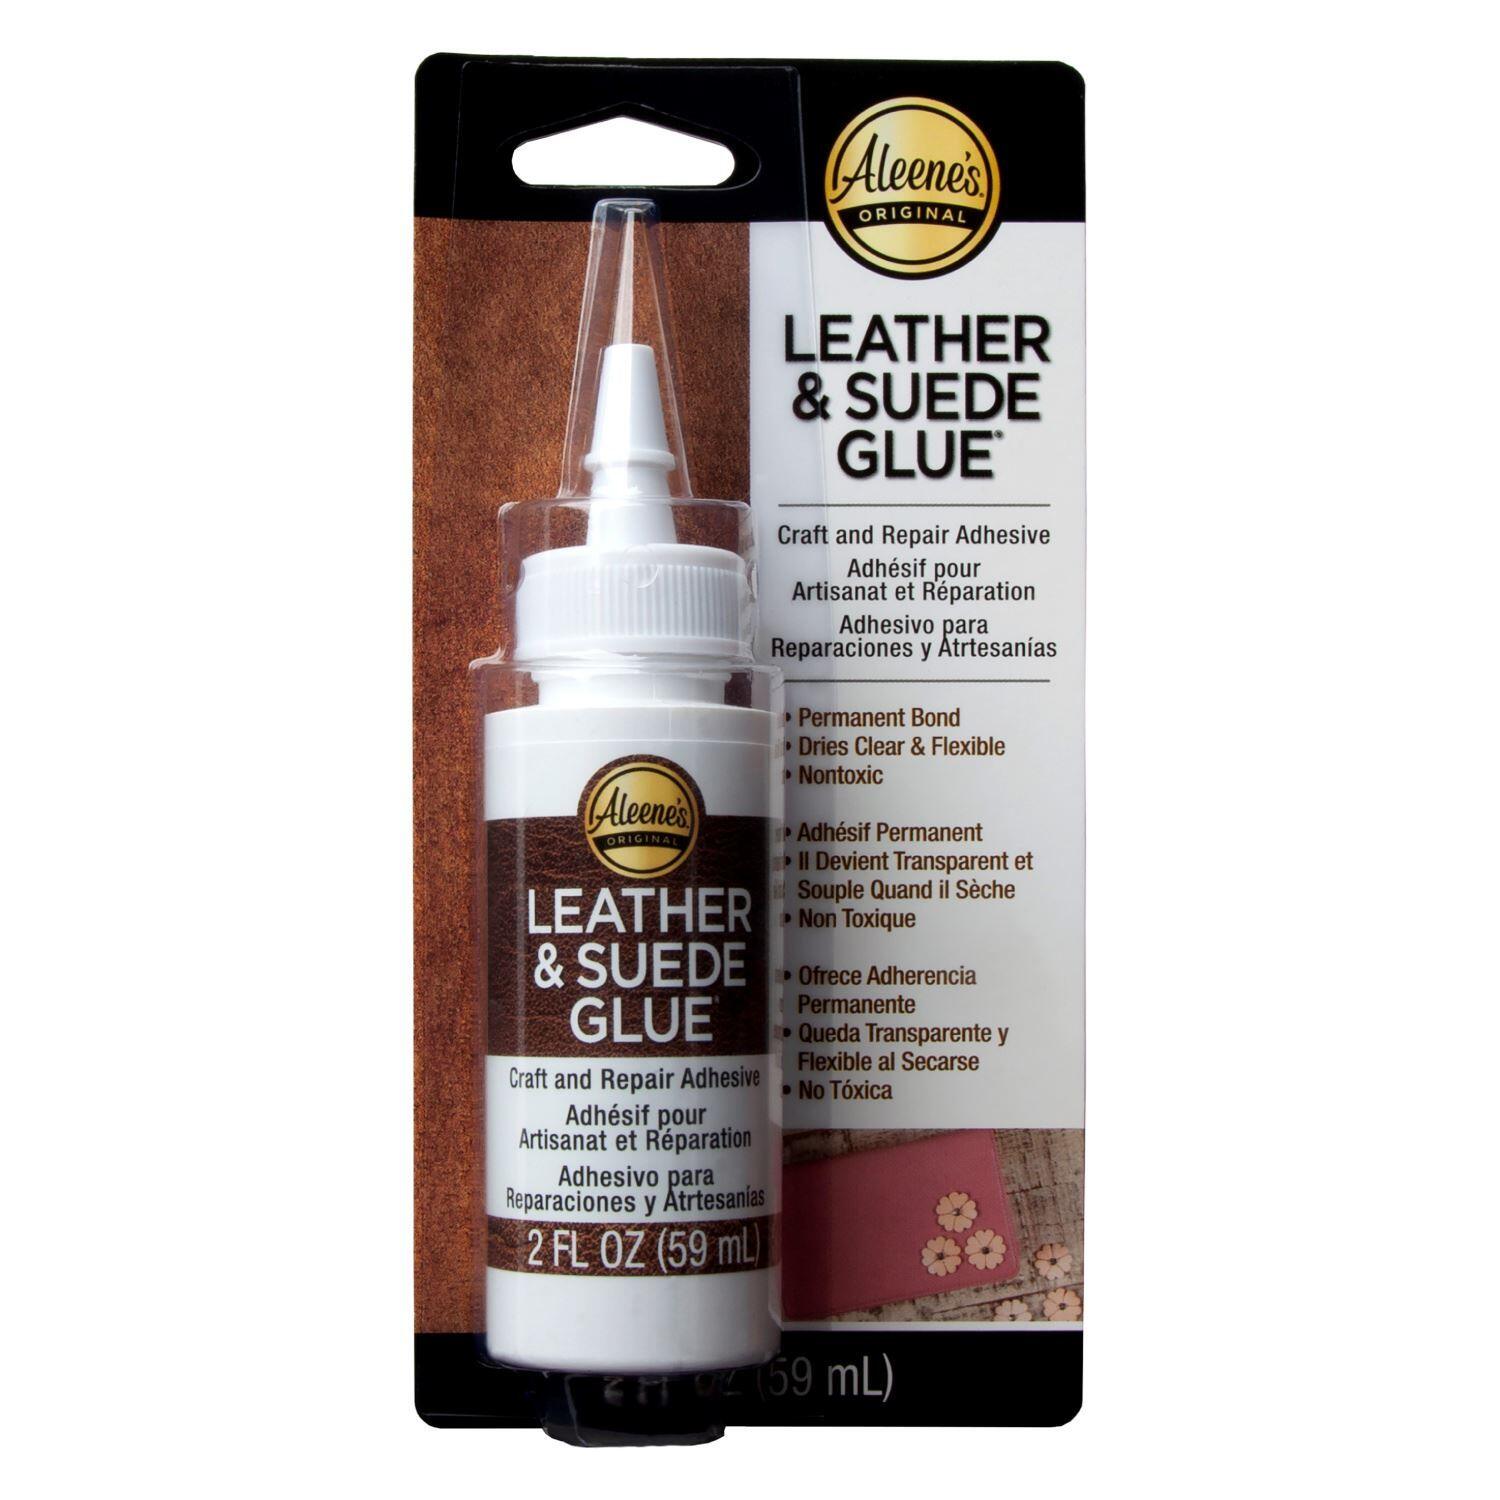 Leather glue: Everything you need to know